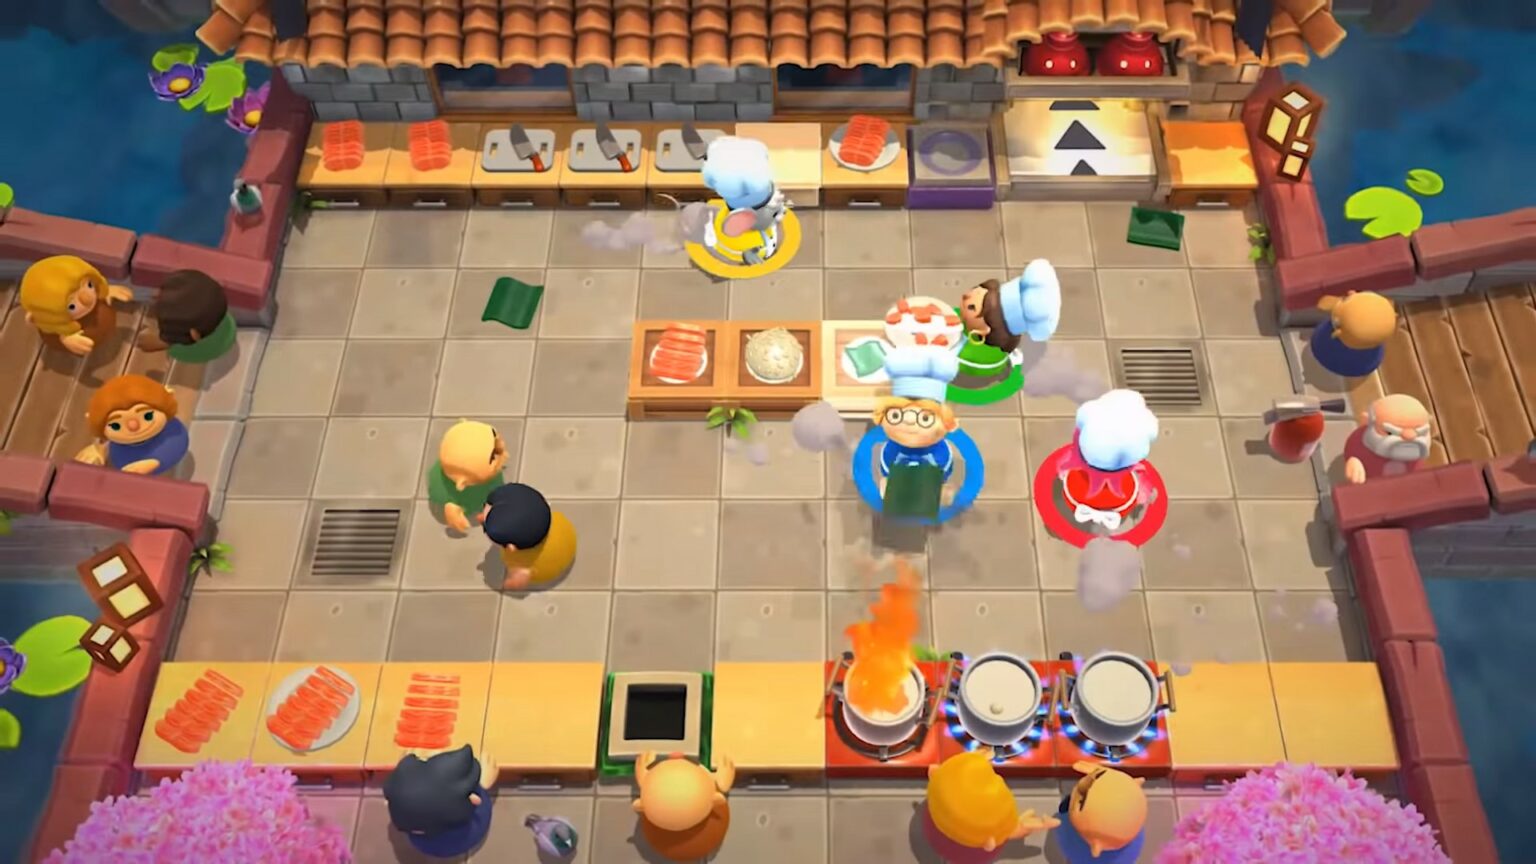 Get a free copy of Overcooked 2 from the Epic Games Store ...
